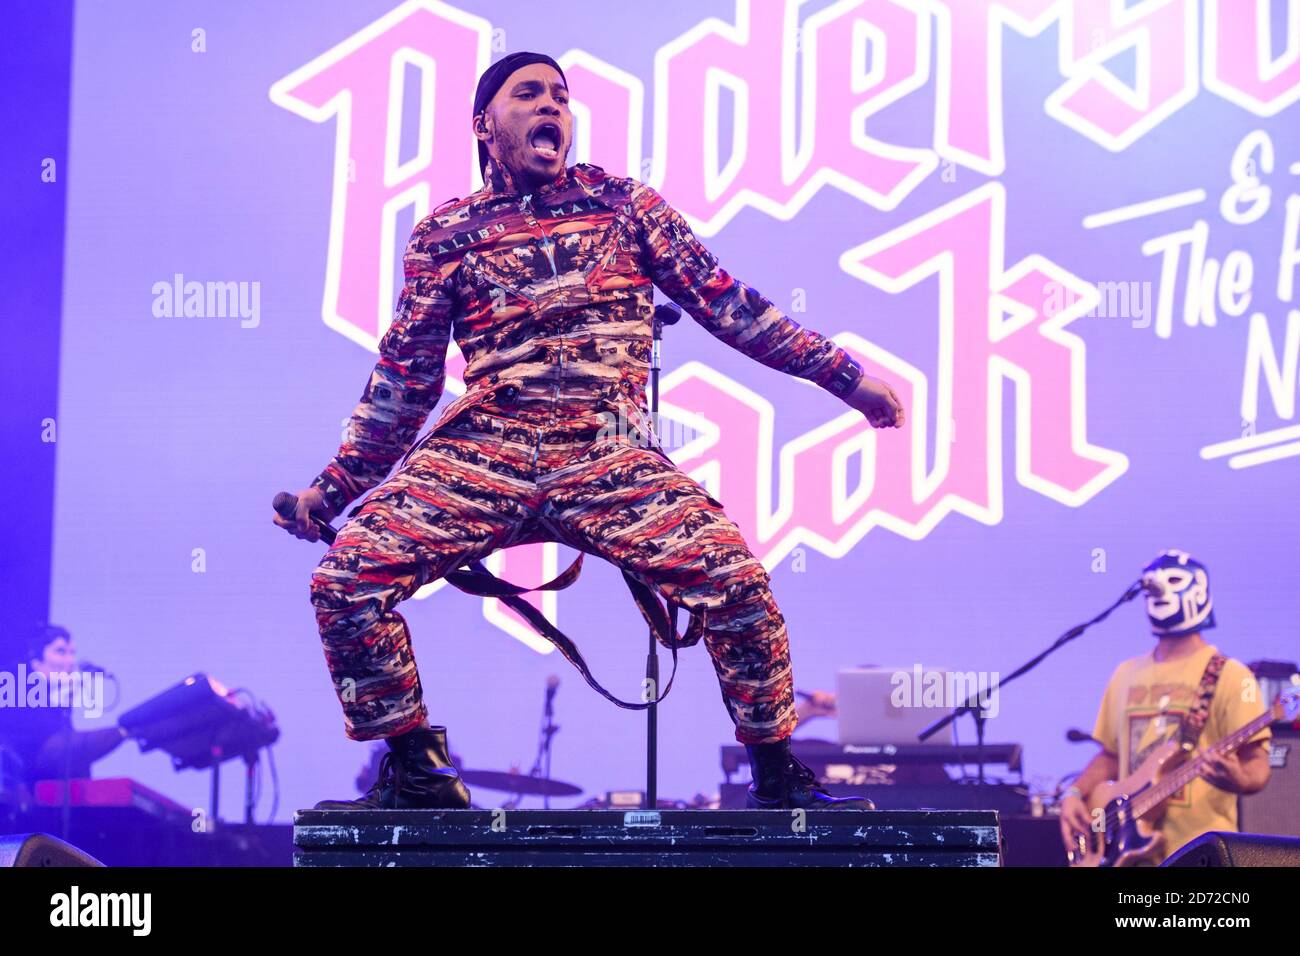 anderson-paak-performing-during-the-glas